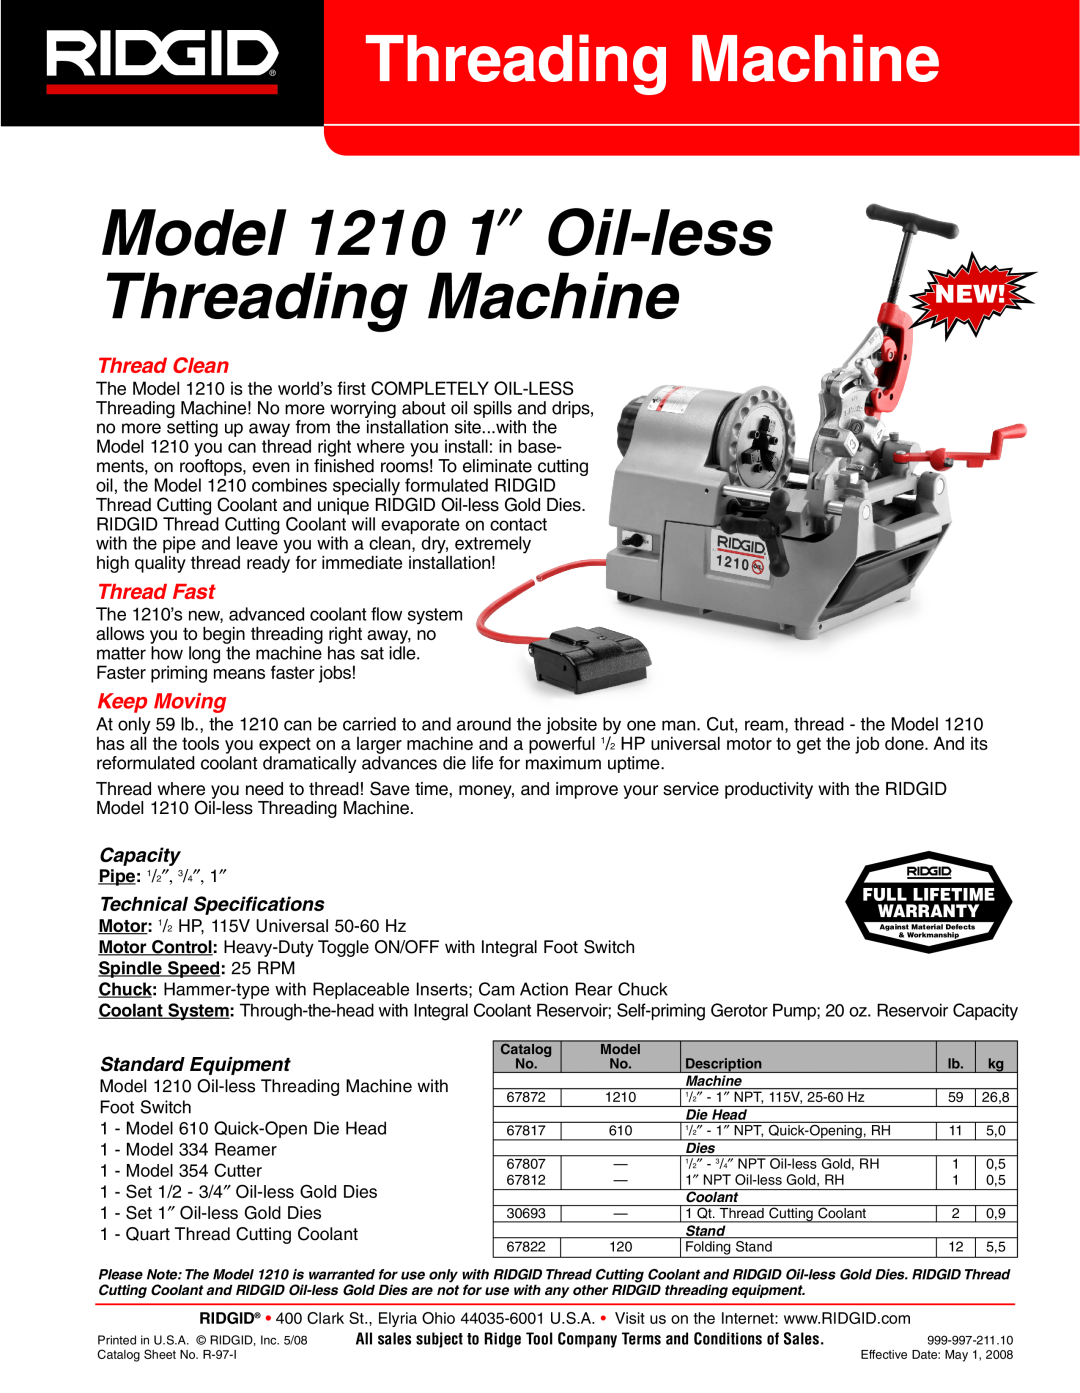 RIDGID technical specifications Threading Machine, Model 1210 1 ″ Oil-less, Thread Clean, Thread Fast, Keep Moving 